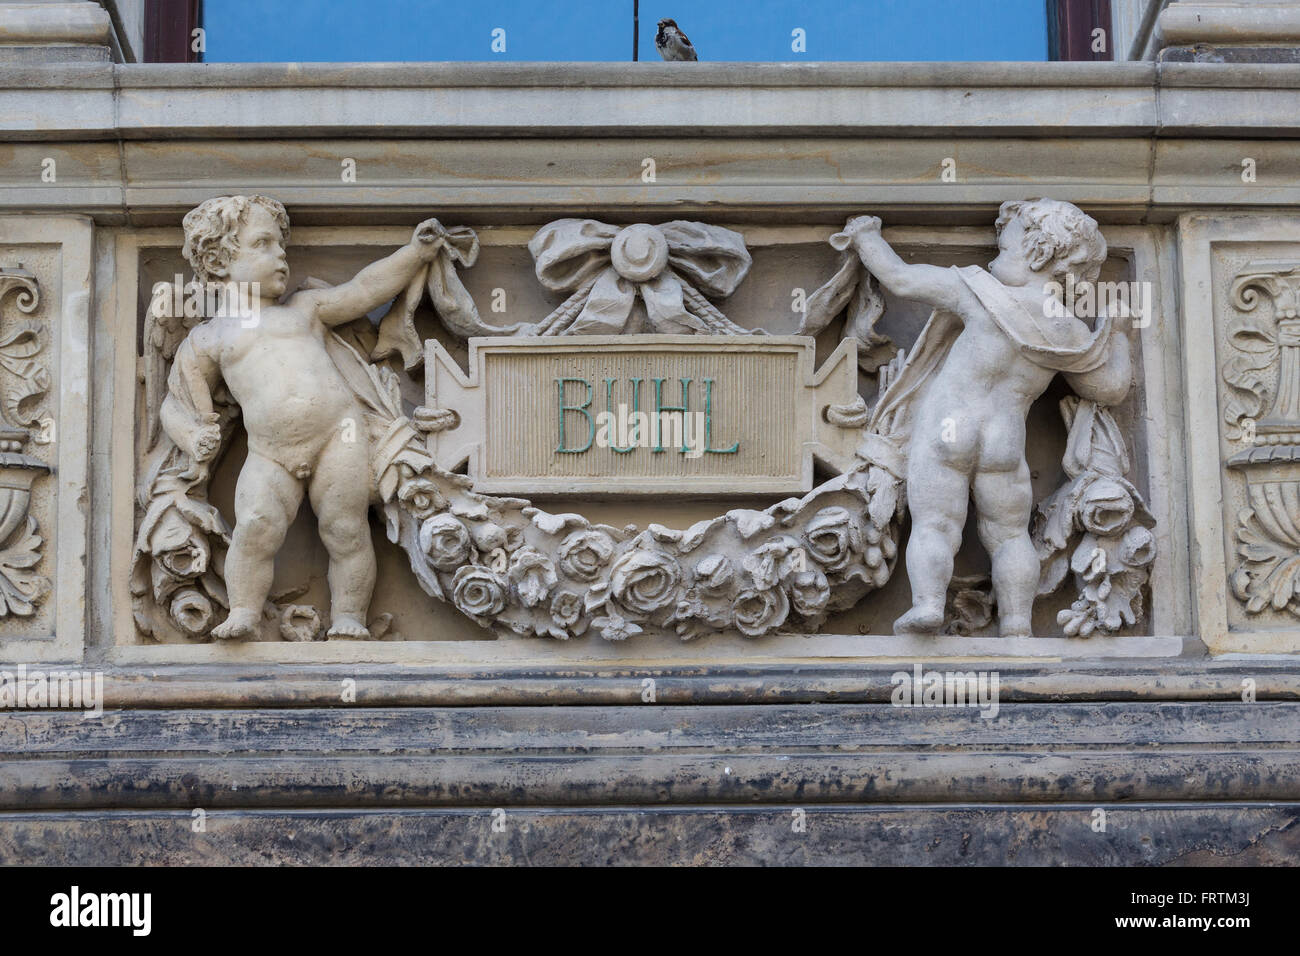 BERLIN, GERMANY - SEPTEMBER 01, 2015: Detail of the exterior of the Martin-Gropius-Bau building in Berlin Germany on August 01,  Stock Photo